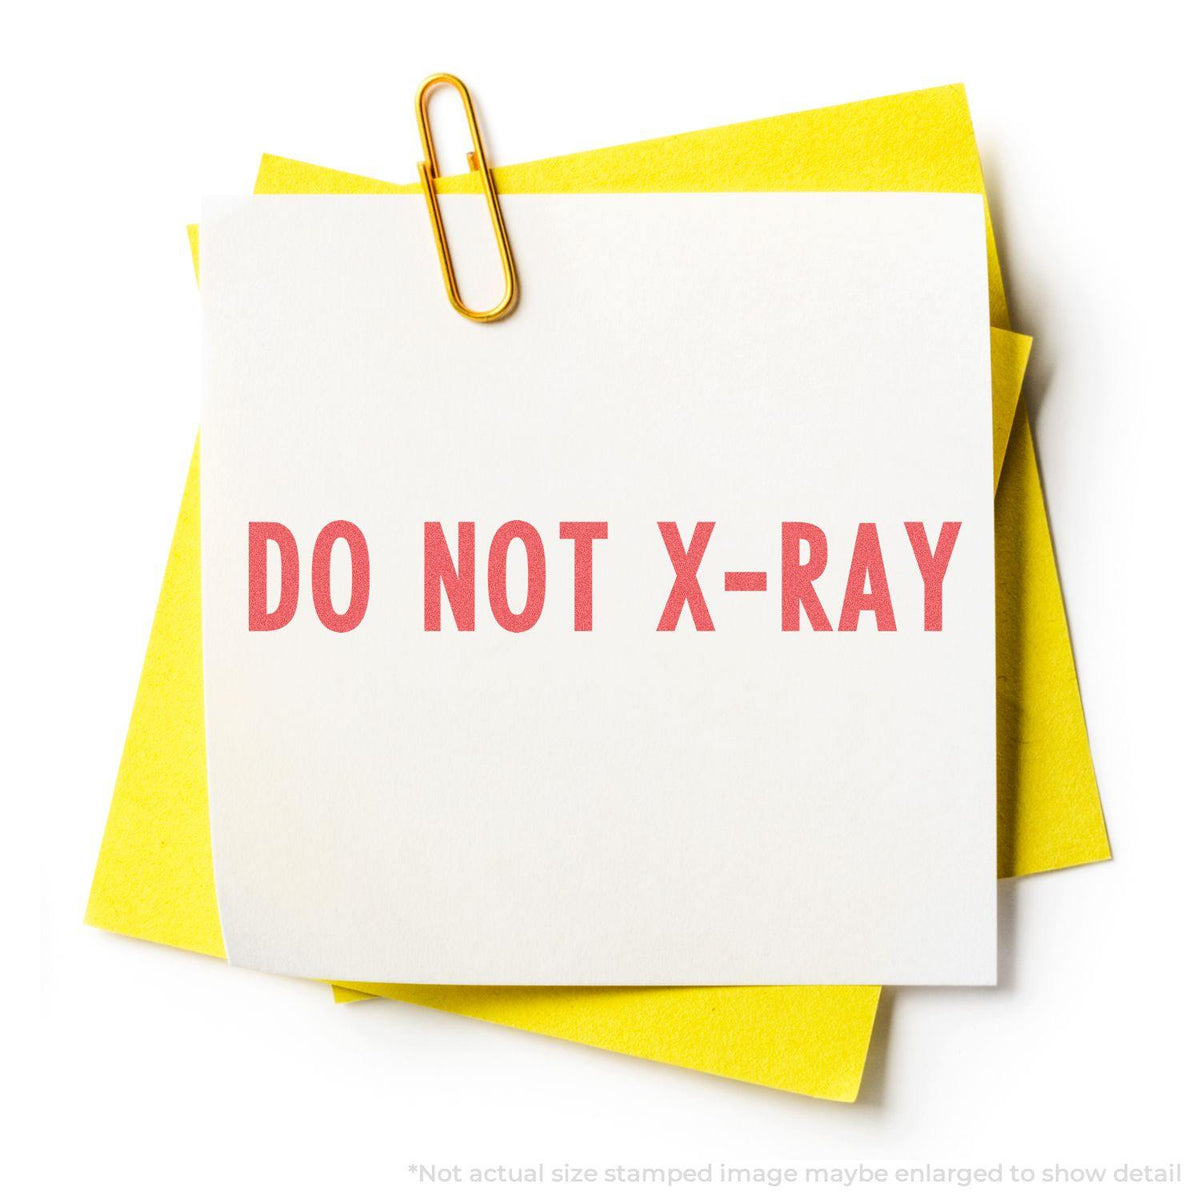 In Use Photo of Do Not X-Ray Xstamper Stamp